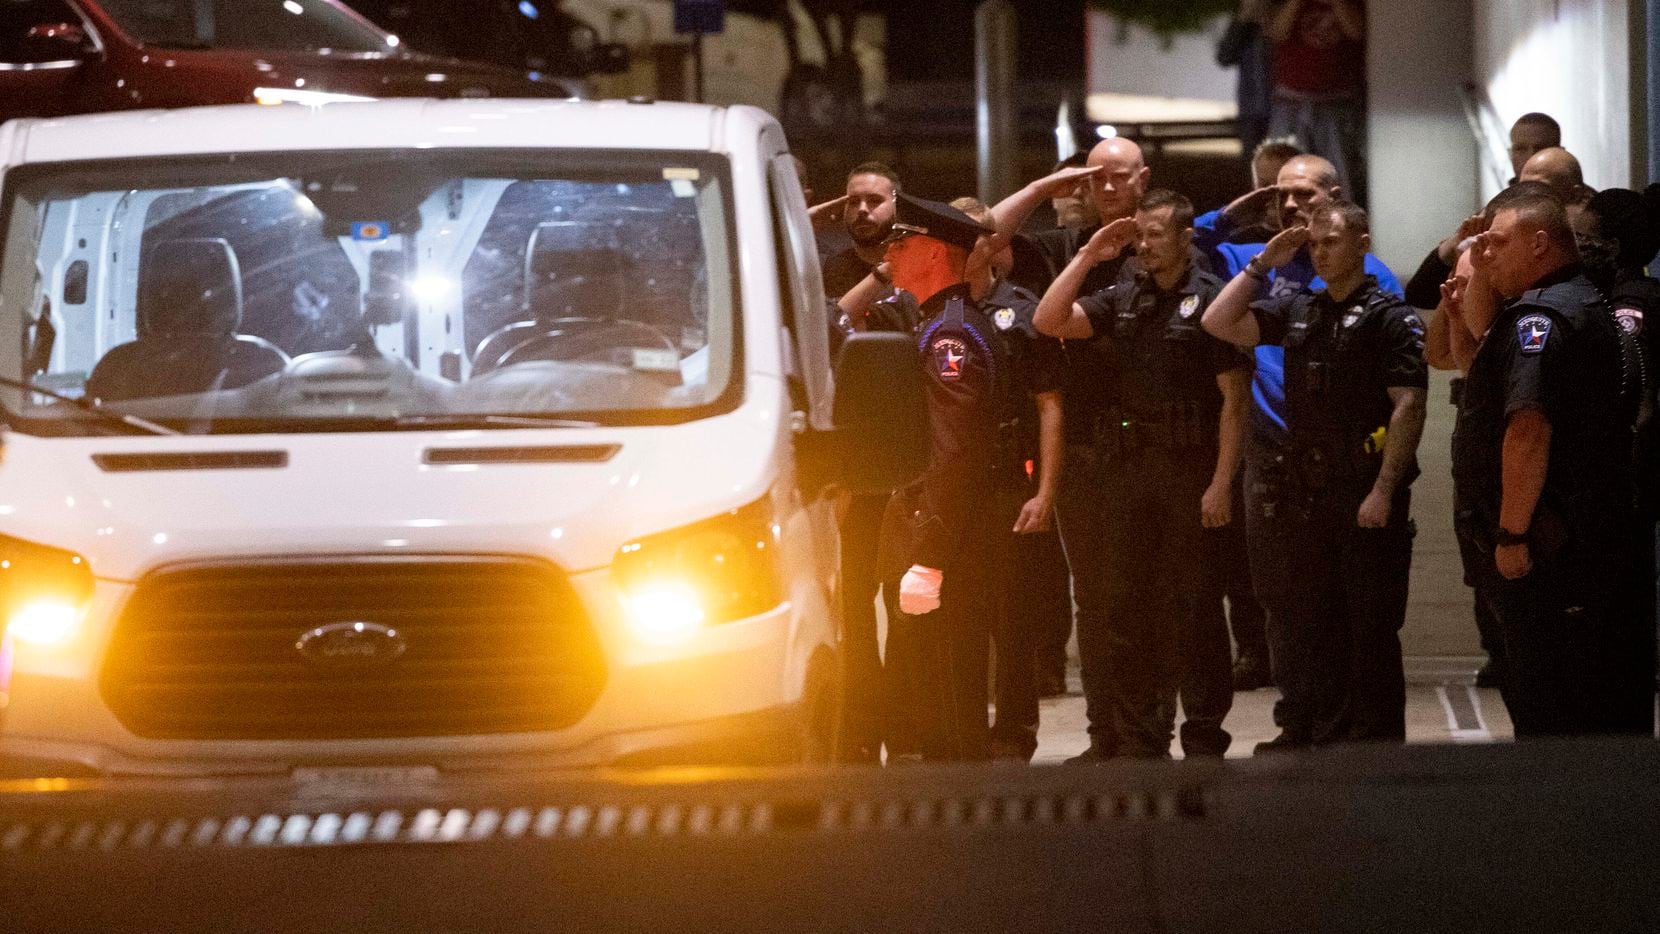 Officers salute as a Mesquite police officer’s body is loaded into a van outside Baylor University Medical Center at Dallas on Friday evening.